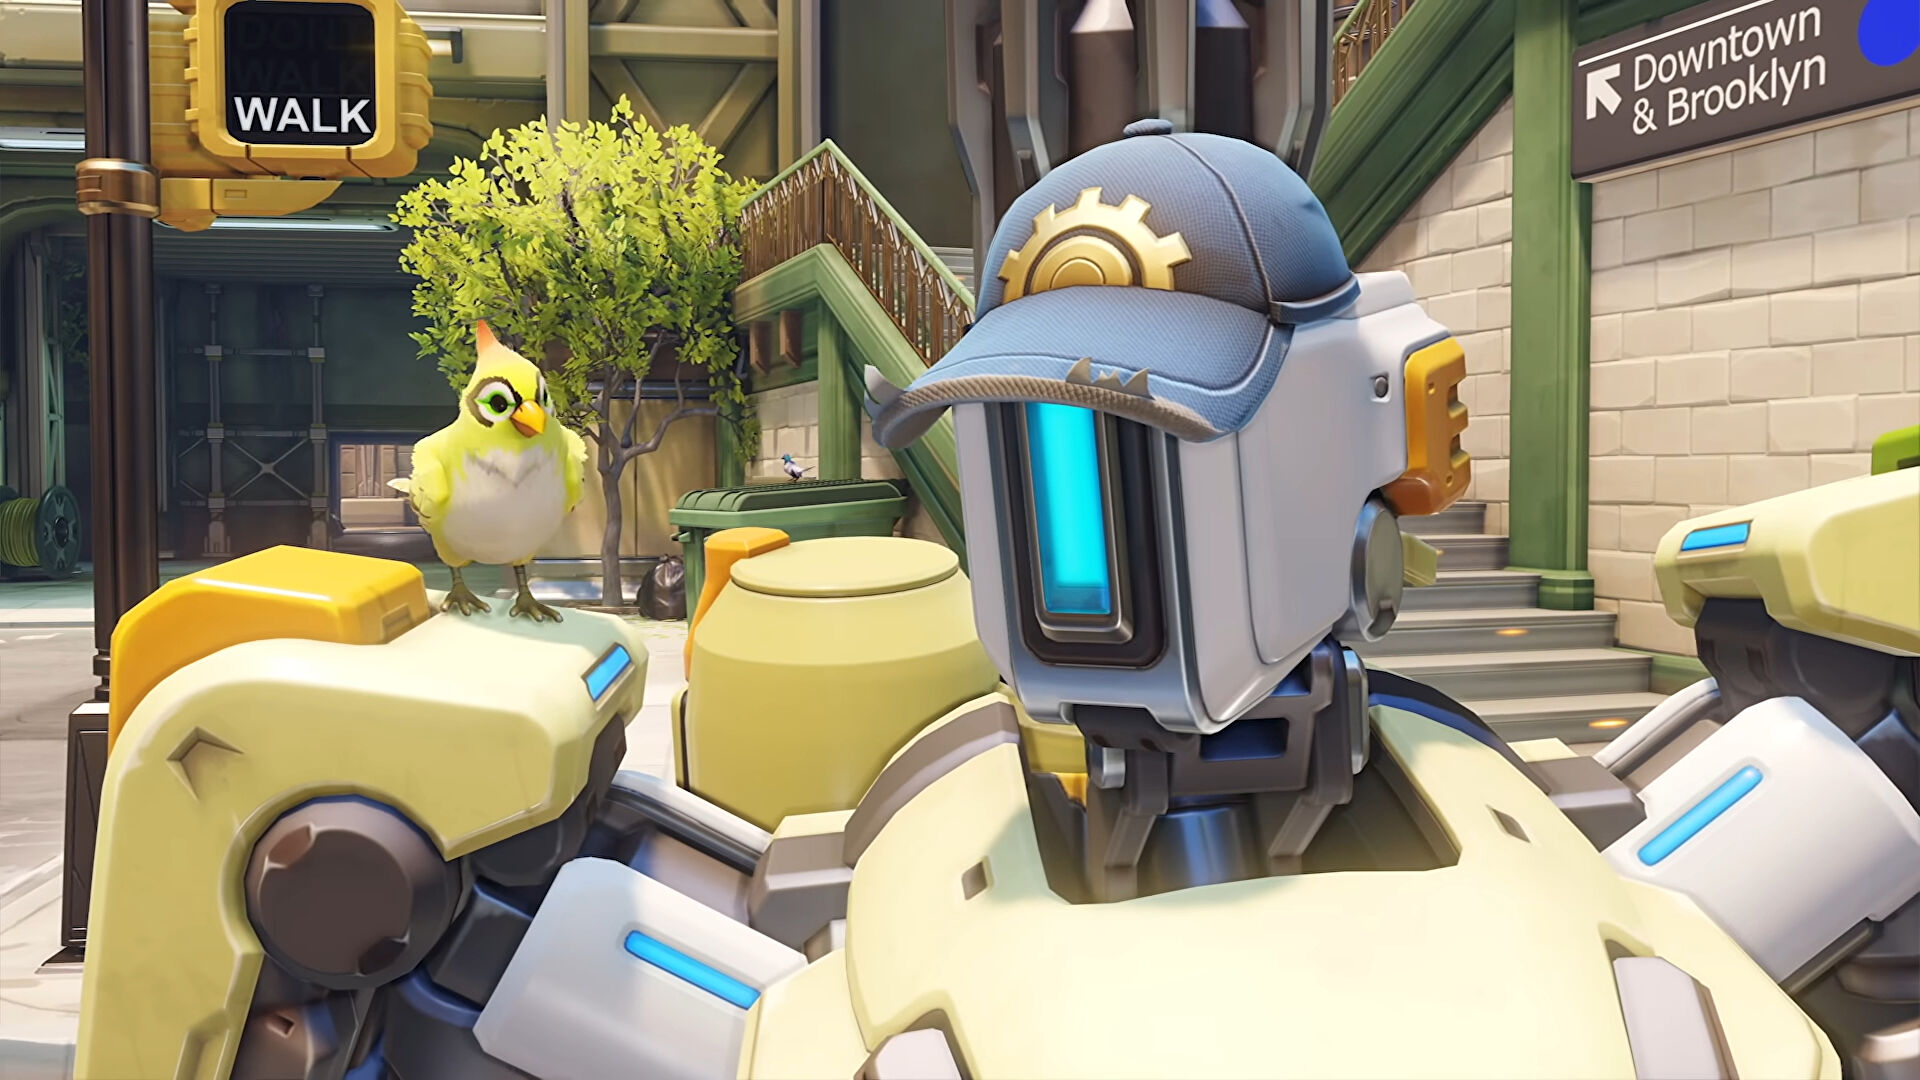 Overwatch 2's launch issues being made worse by DDoS attack